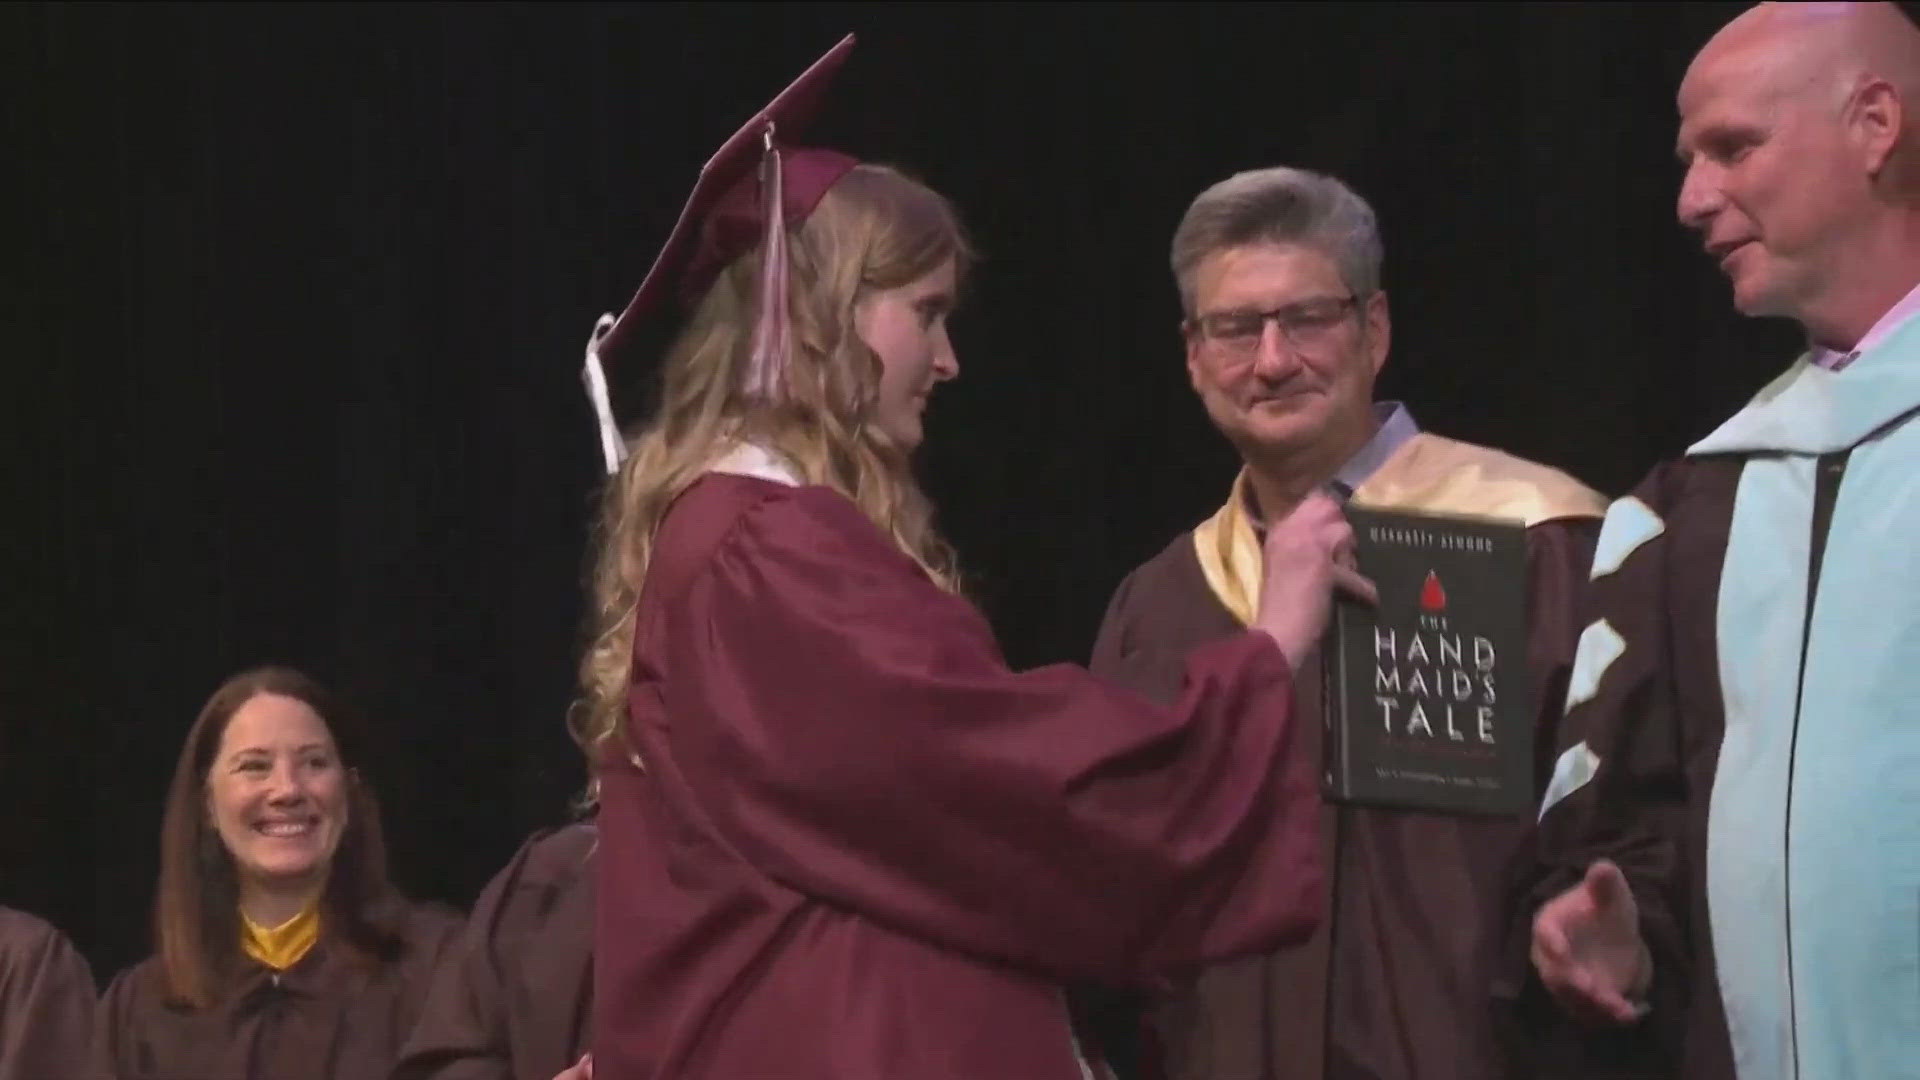 2024 grad Annabelle Jenkins tried to give the superintendent a banned book called "The Hand Maid's Tale." After he didn't take it, she left it at his feet and left.